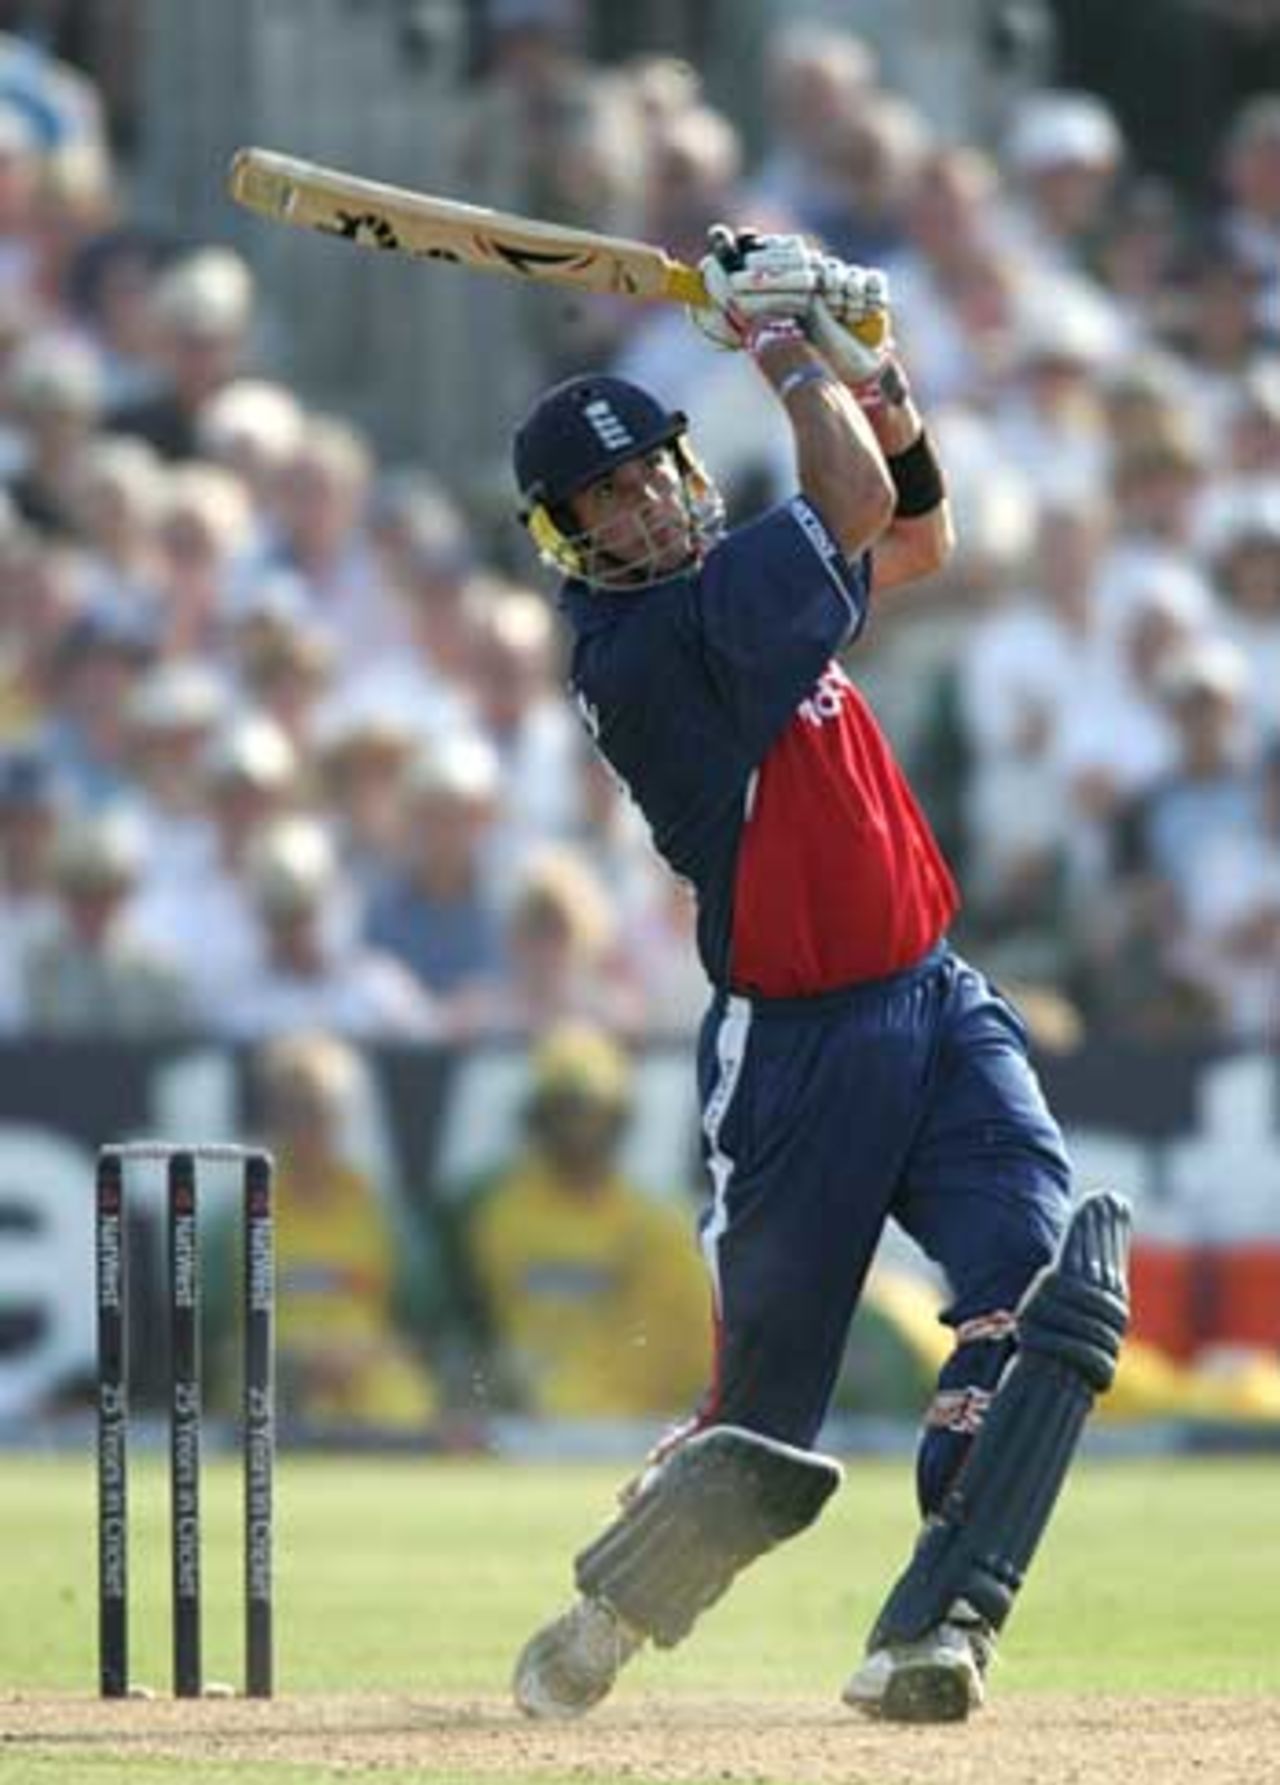 Kevin Pietersen launches another boundary during his 91 from 65 balls, England v Australia, NatWest Series, Bristol, June 19